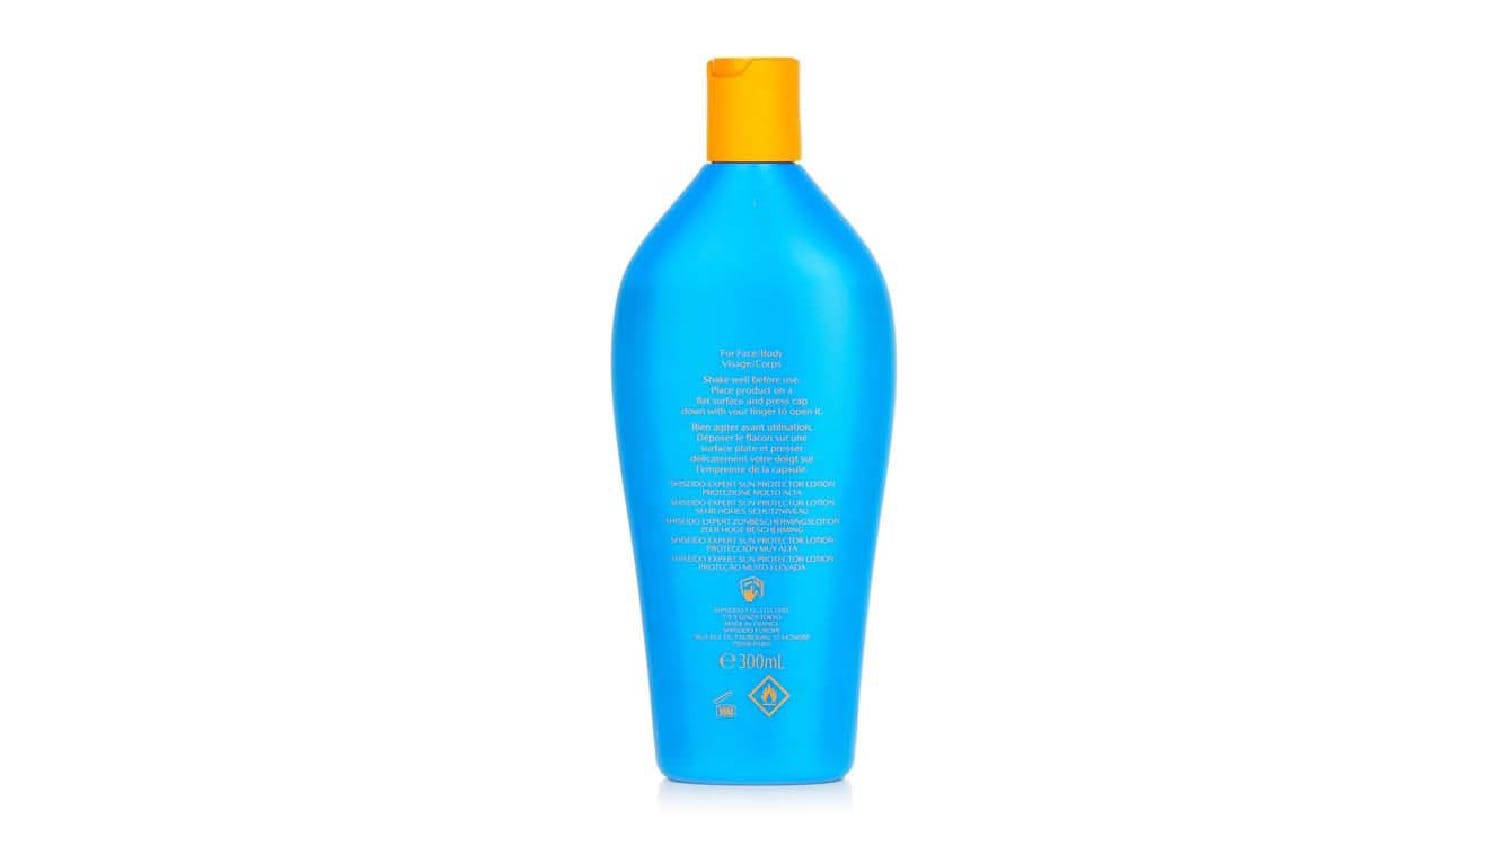 Shiseido Expert Sun Protector Face & Body Lotion SPF 50+ (Very High Protection & Very Water-Resistant) - 300ml/10oz